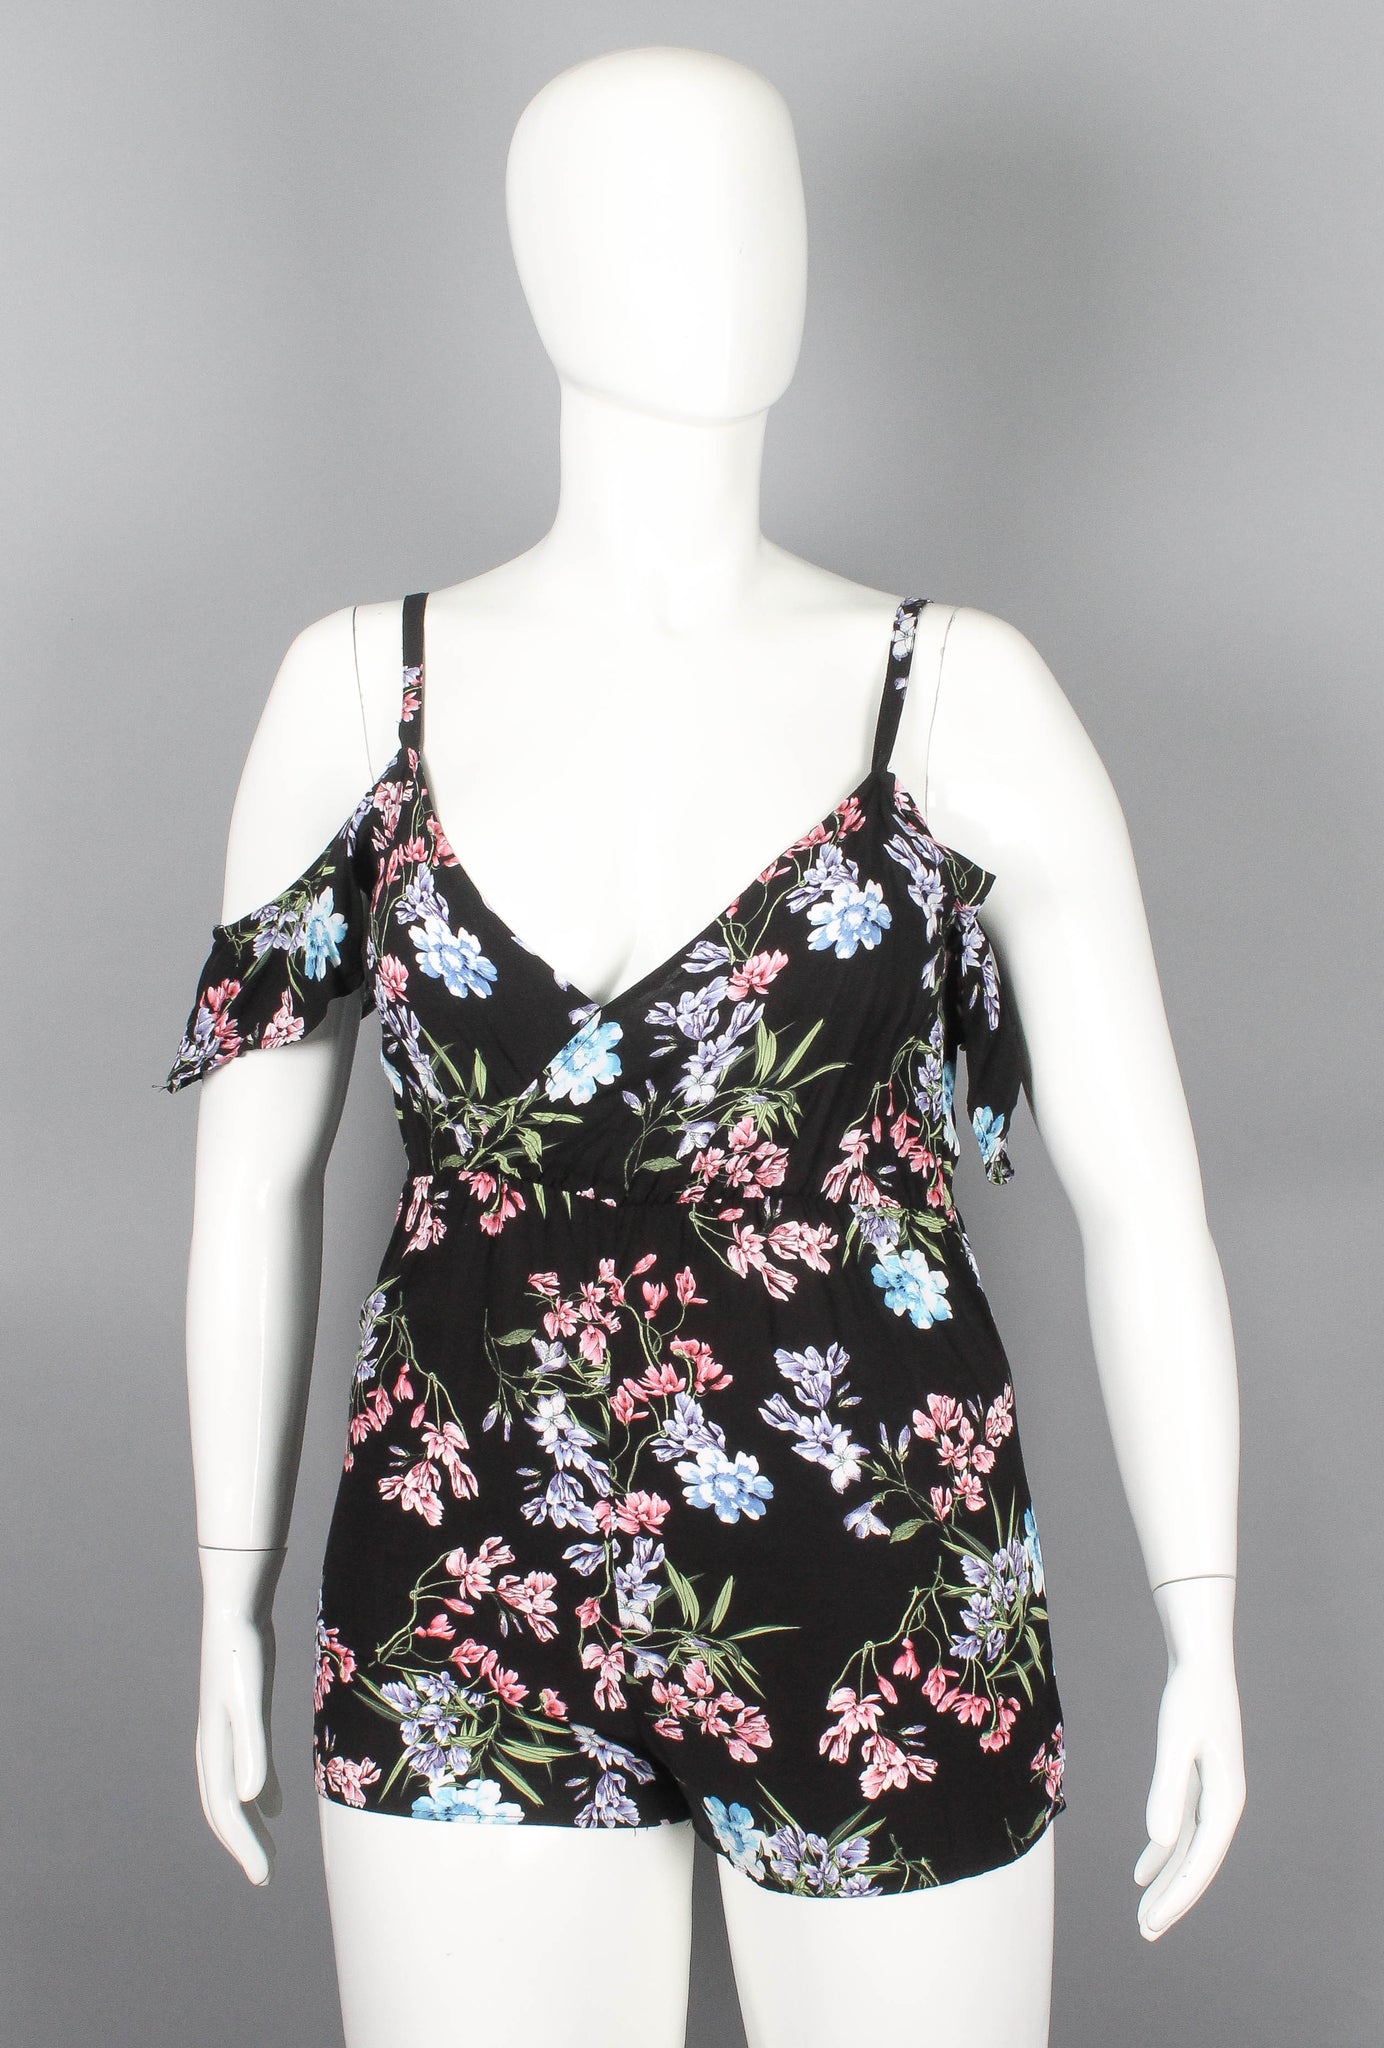 PULL AND BEAR - Jumpsuit Negro Print Floral Rosa